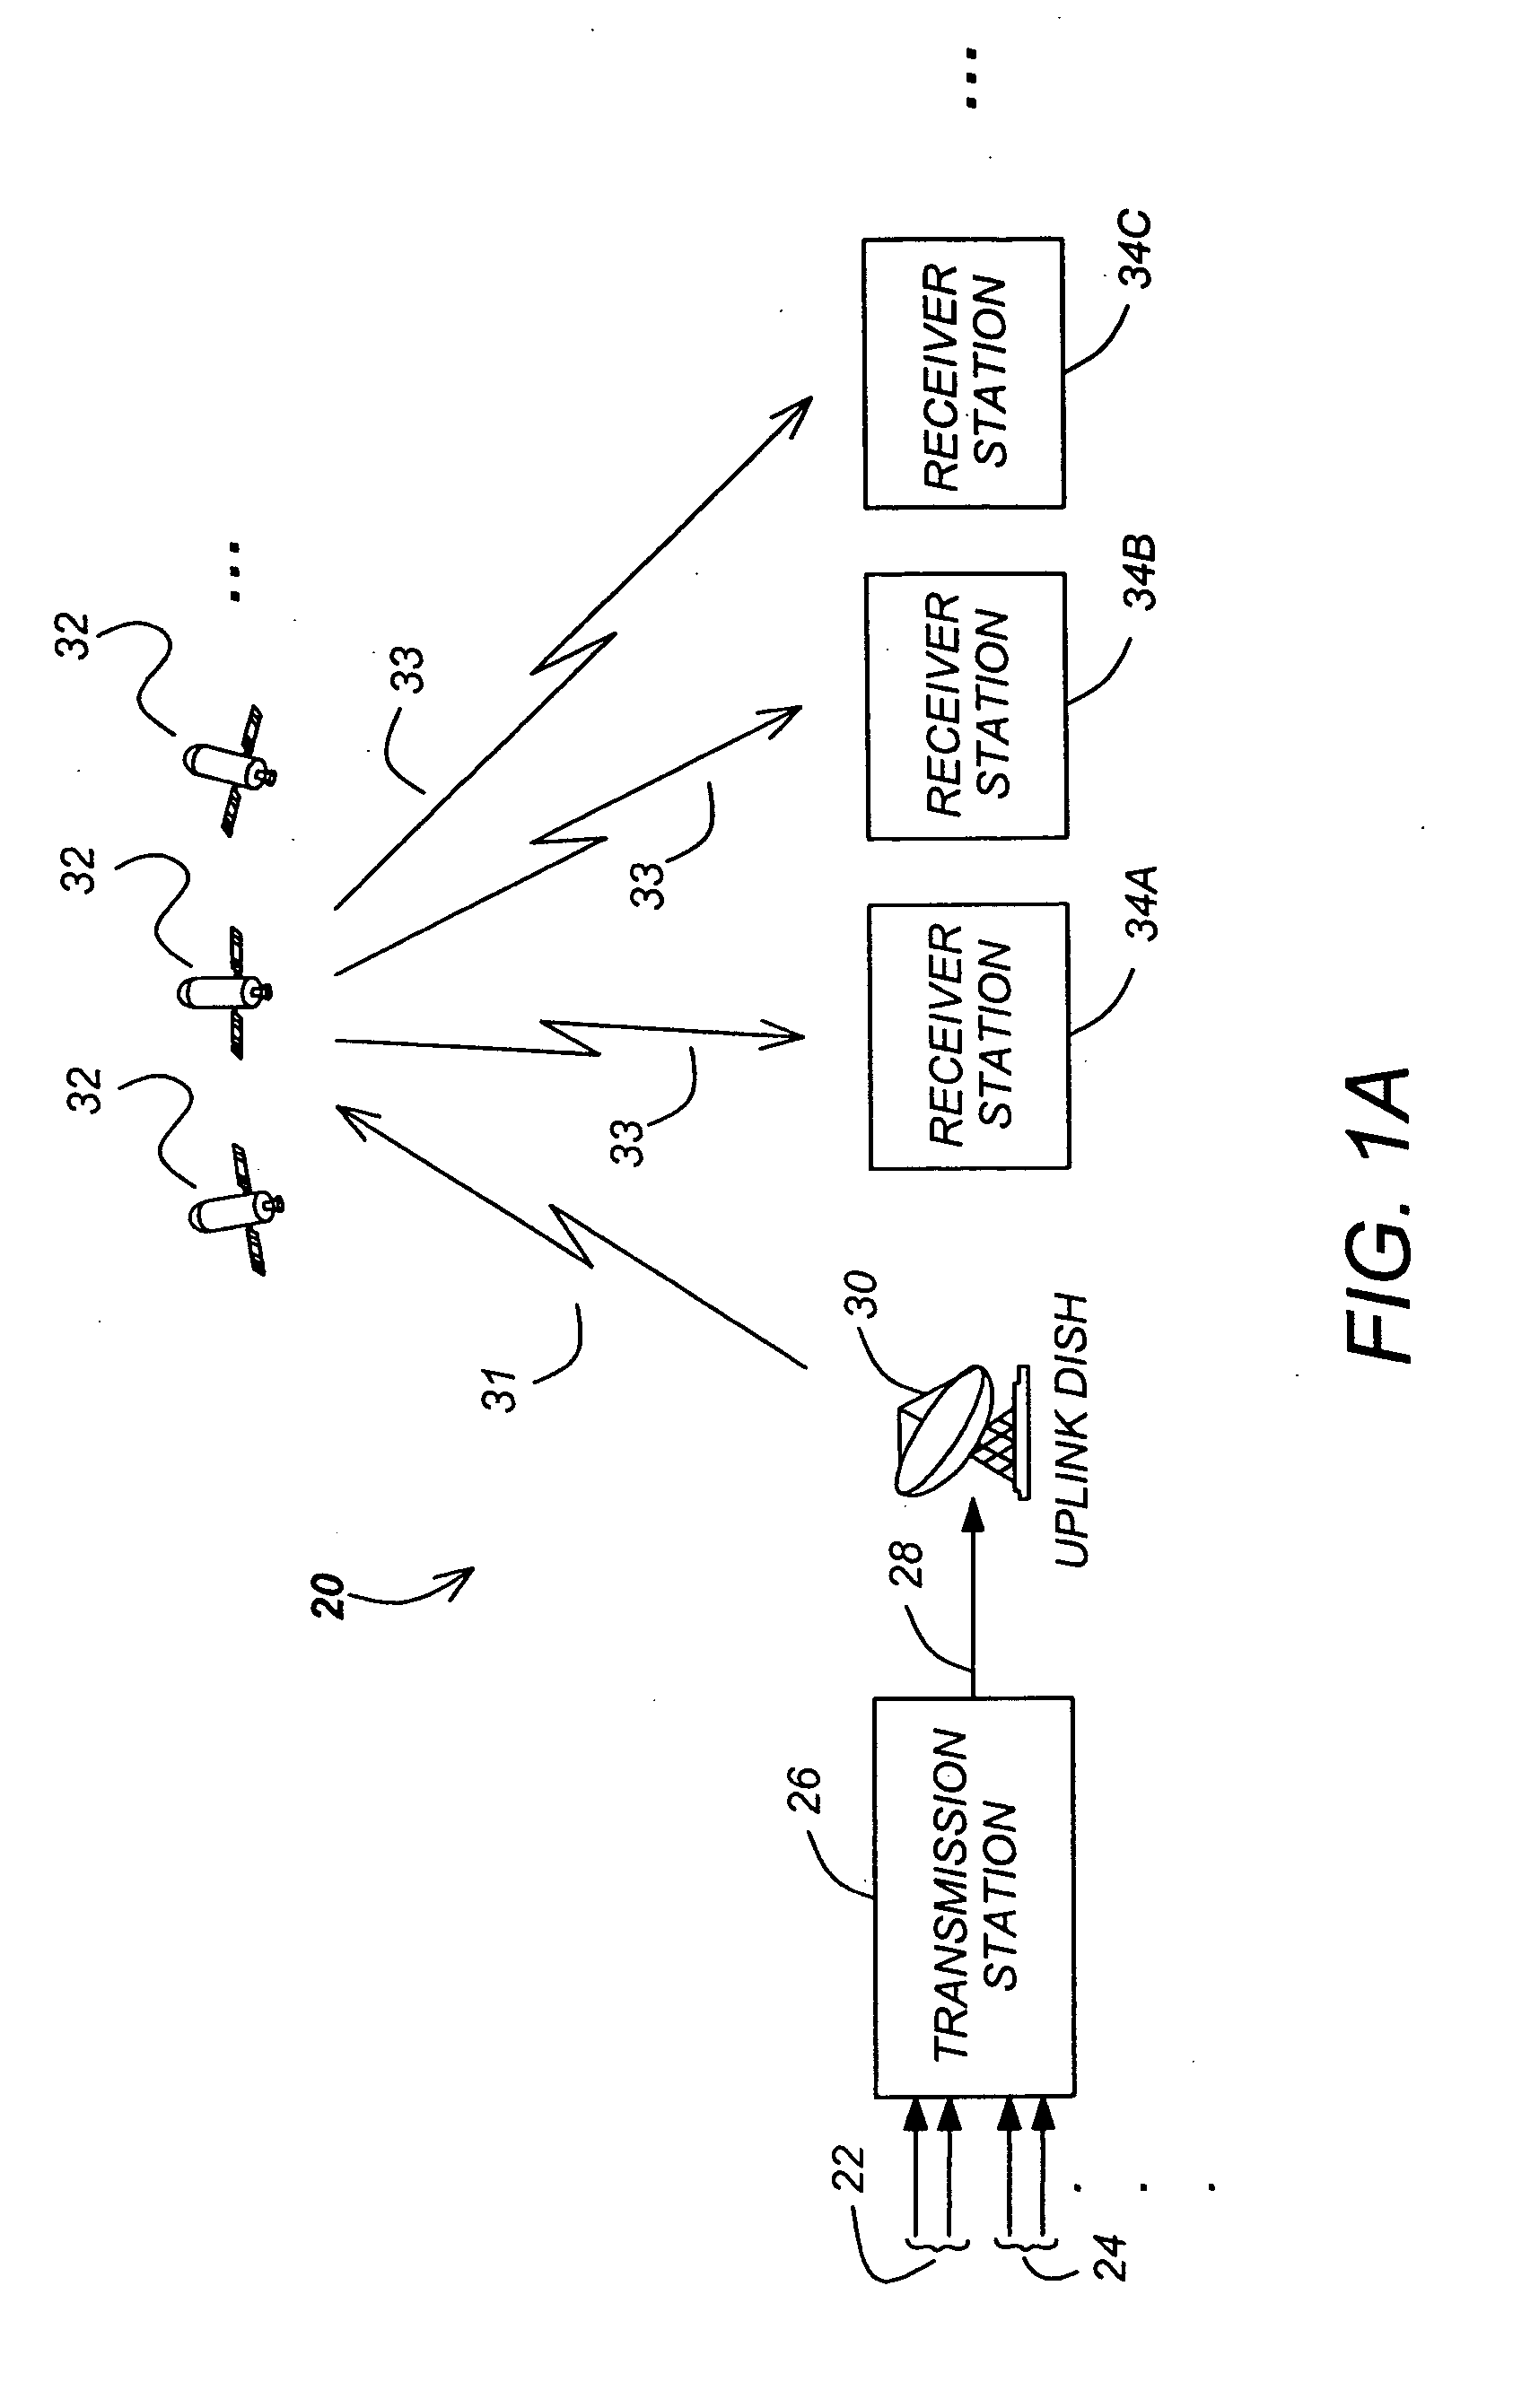 Shifted channel characteristics for mitigating co-channel interference